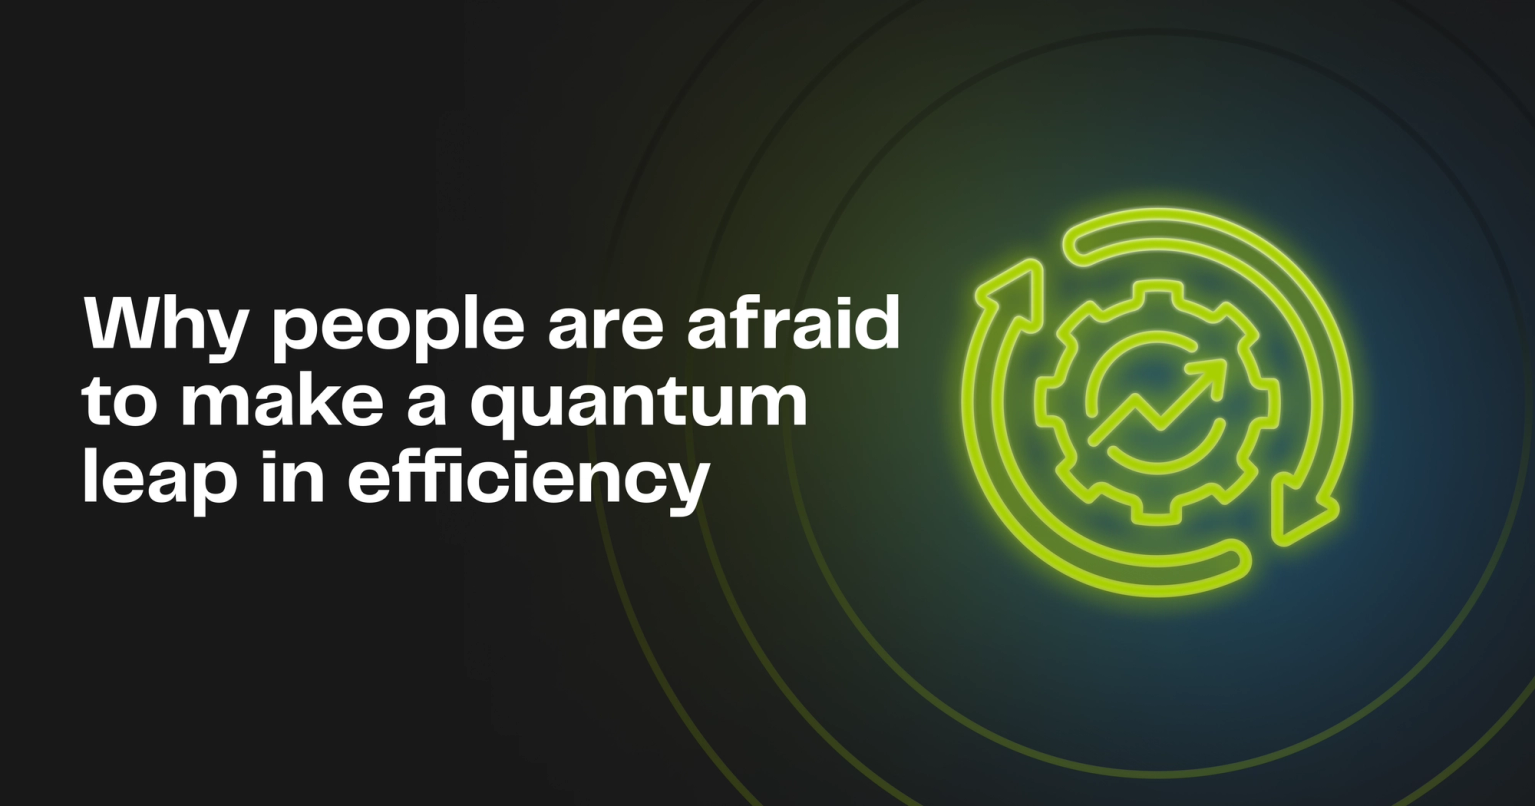 Why people are afraid to make a quantum leap in efficiency